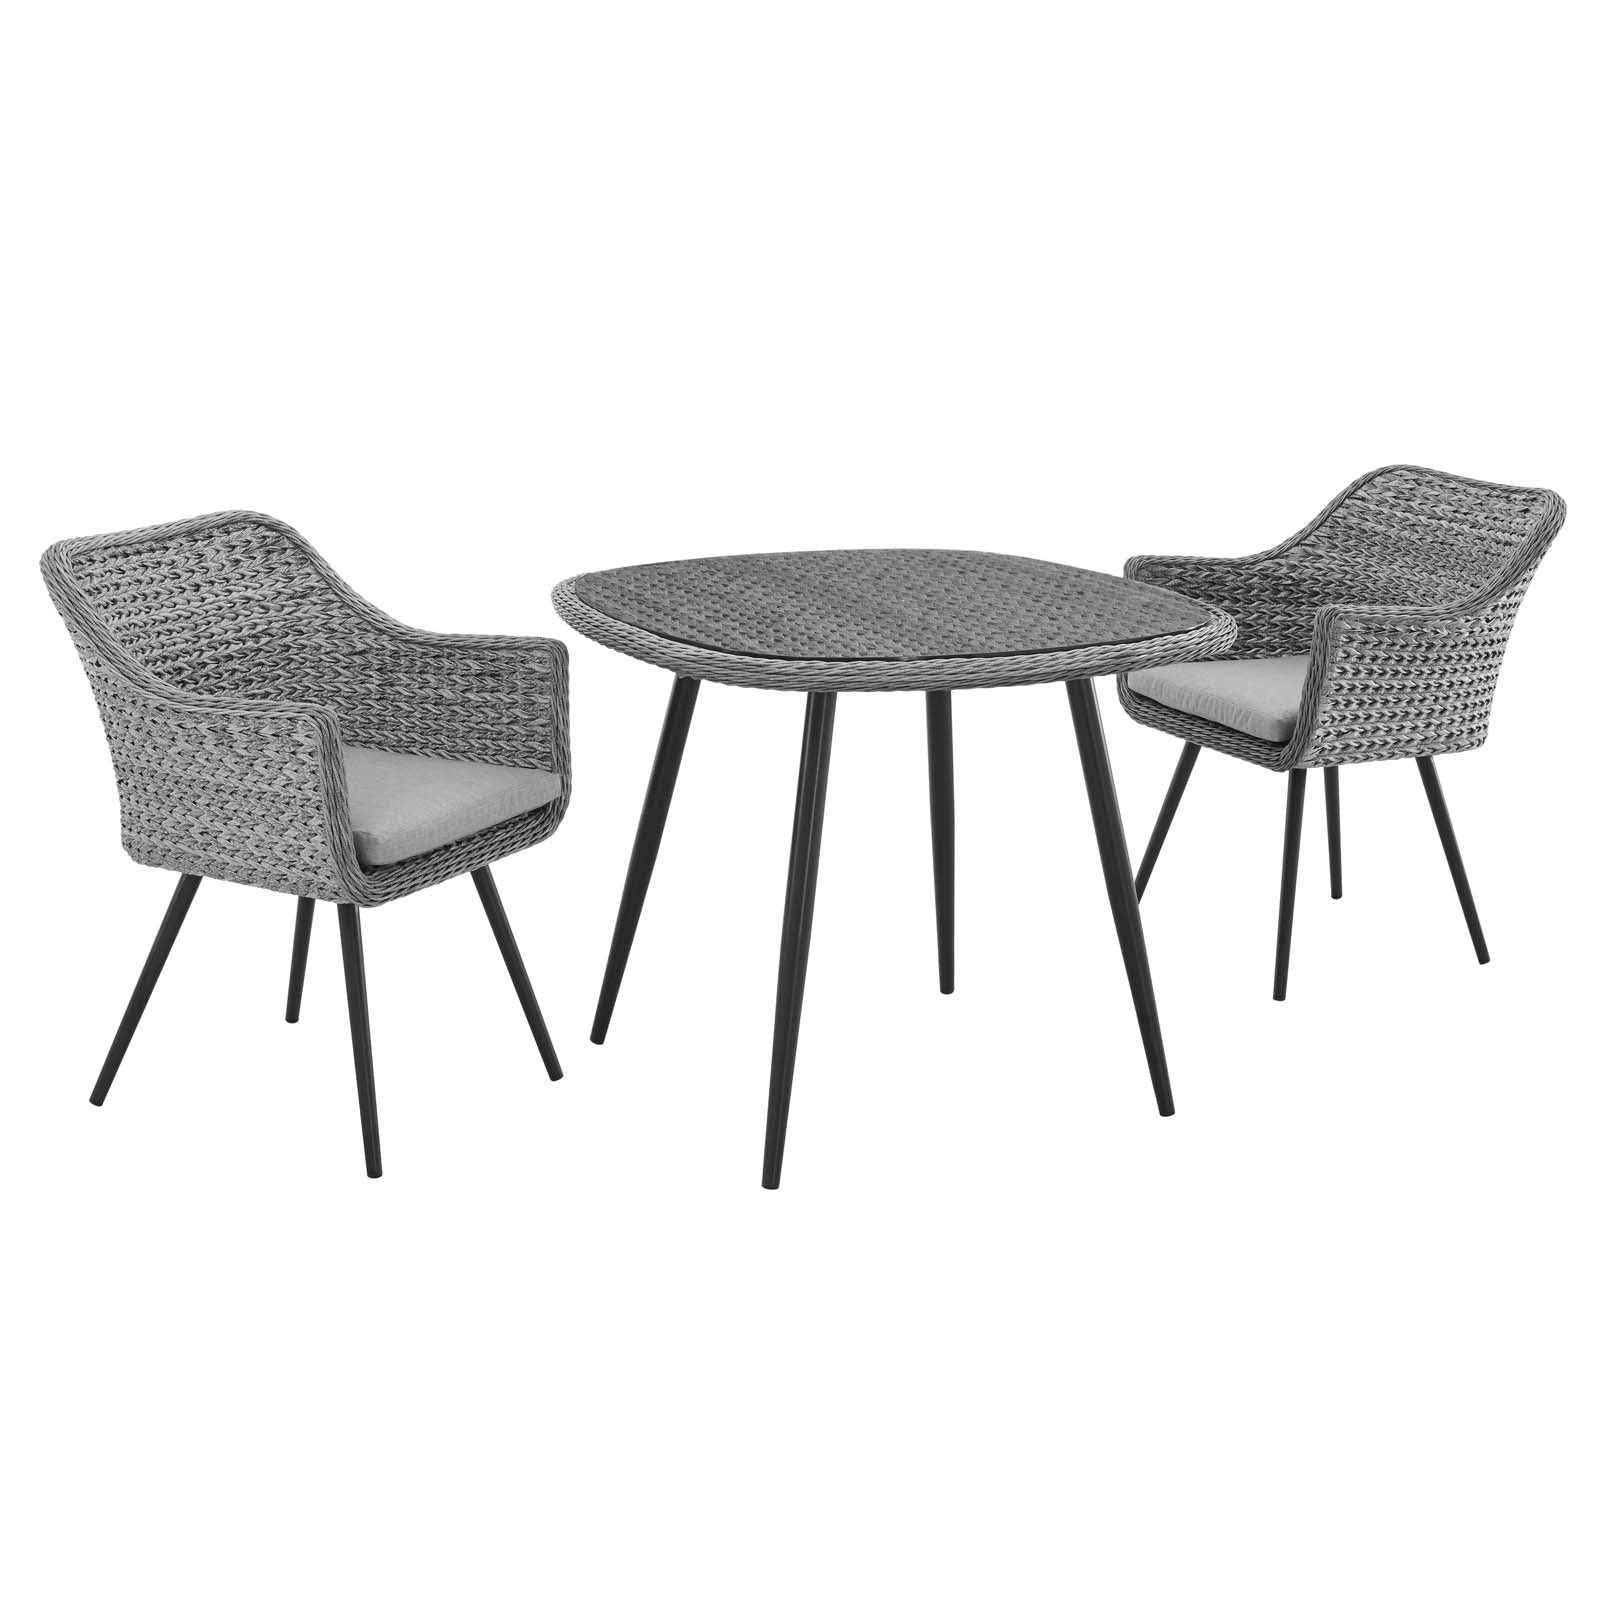 Endeavor 3 Piece Outdoor Patio Wicker Rattan Dining Set-Outdoor Dining Set-Modway-Wall2Wall Furnishings